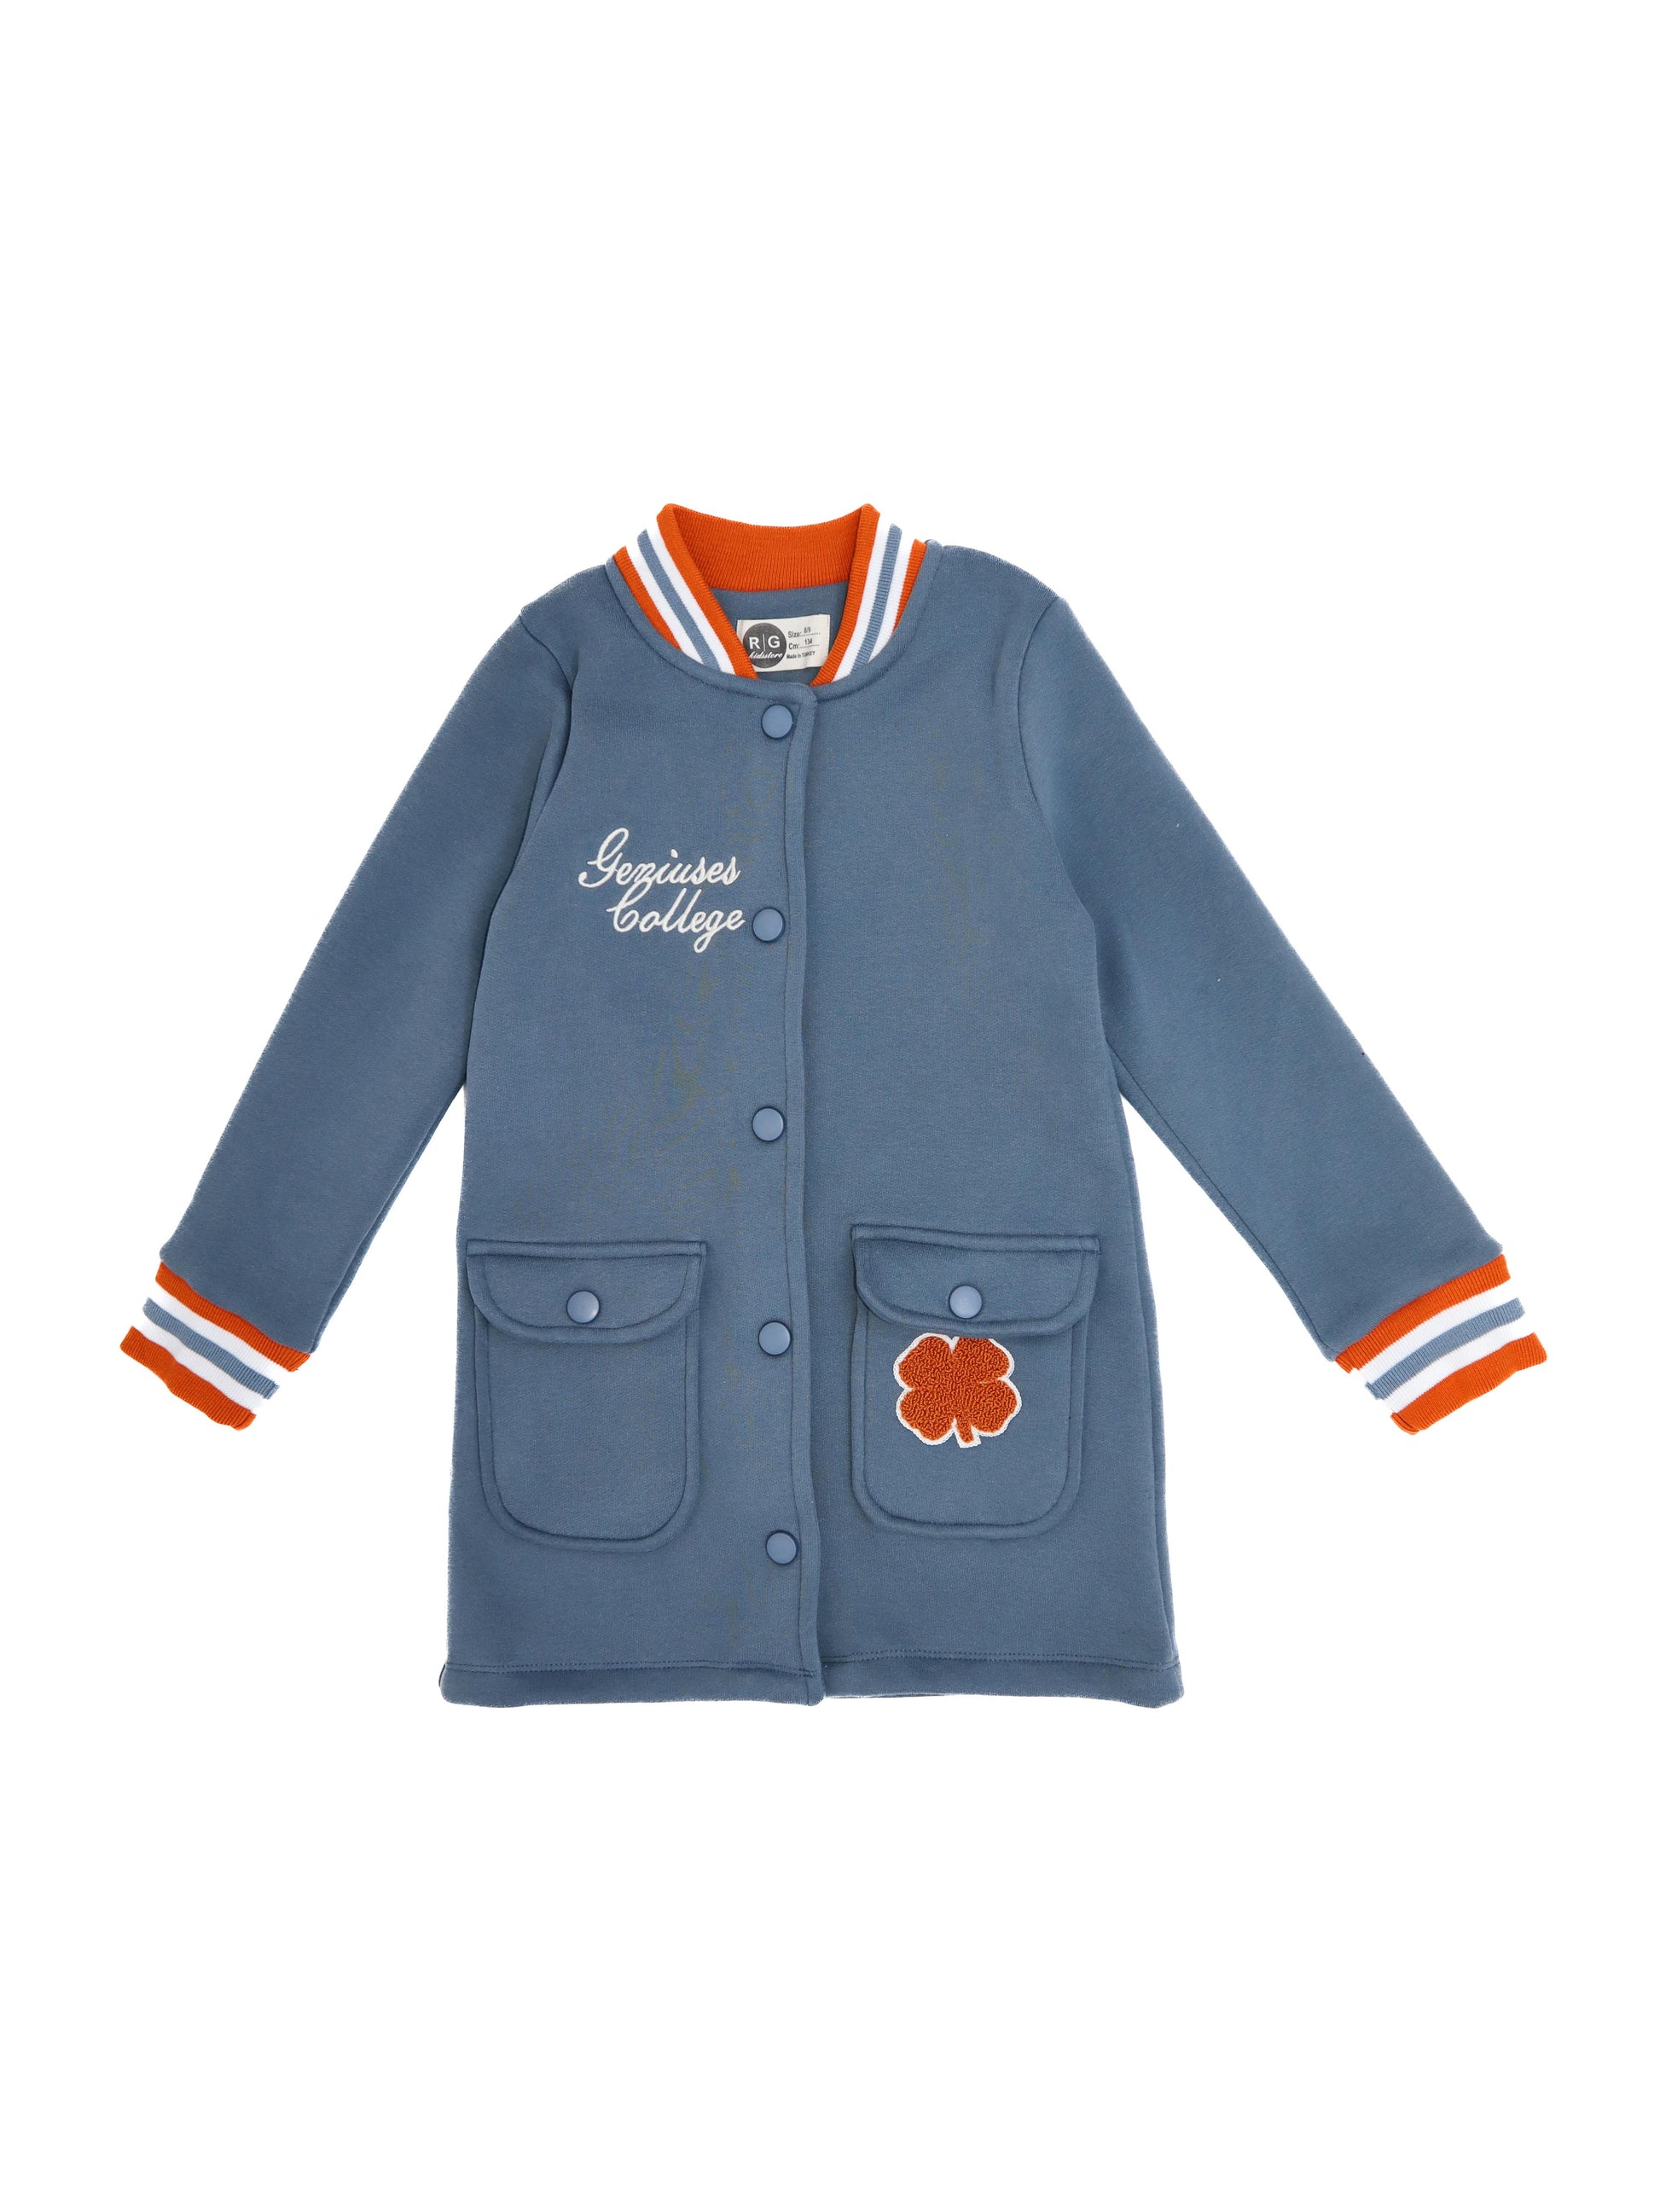 Girls' College Coat with Snaps on the Front